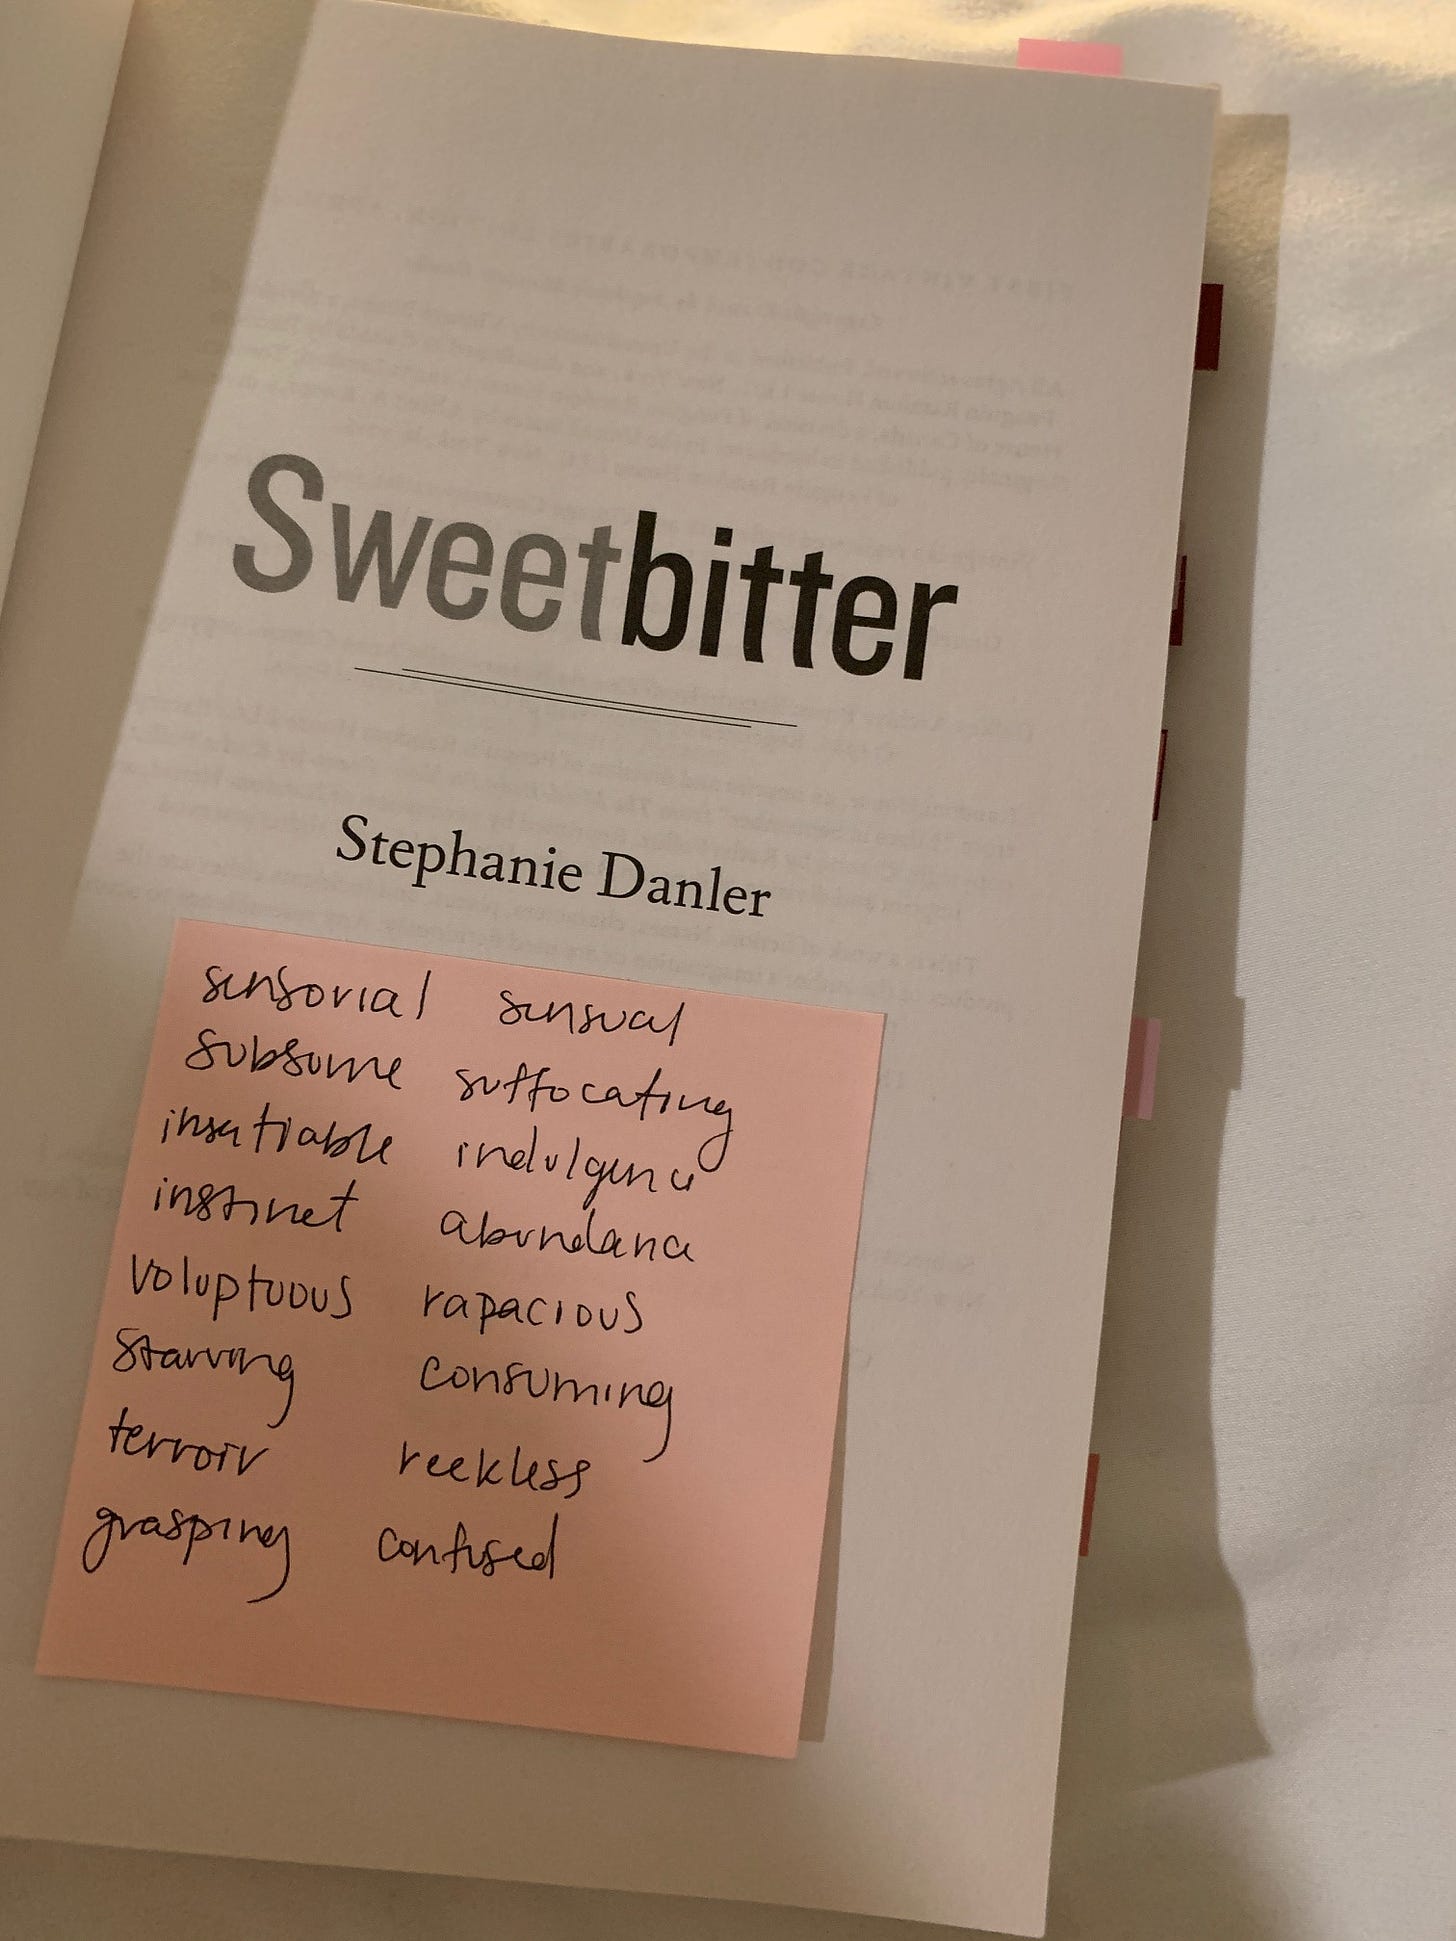 title page of Sweetbitter by Stephanie Danler. Pink post-it note stuck to the middle, with a list of handwritten words.